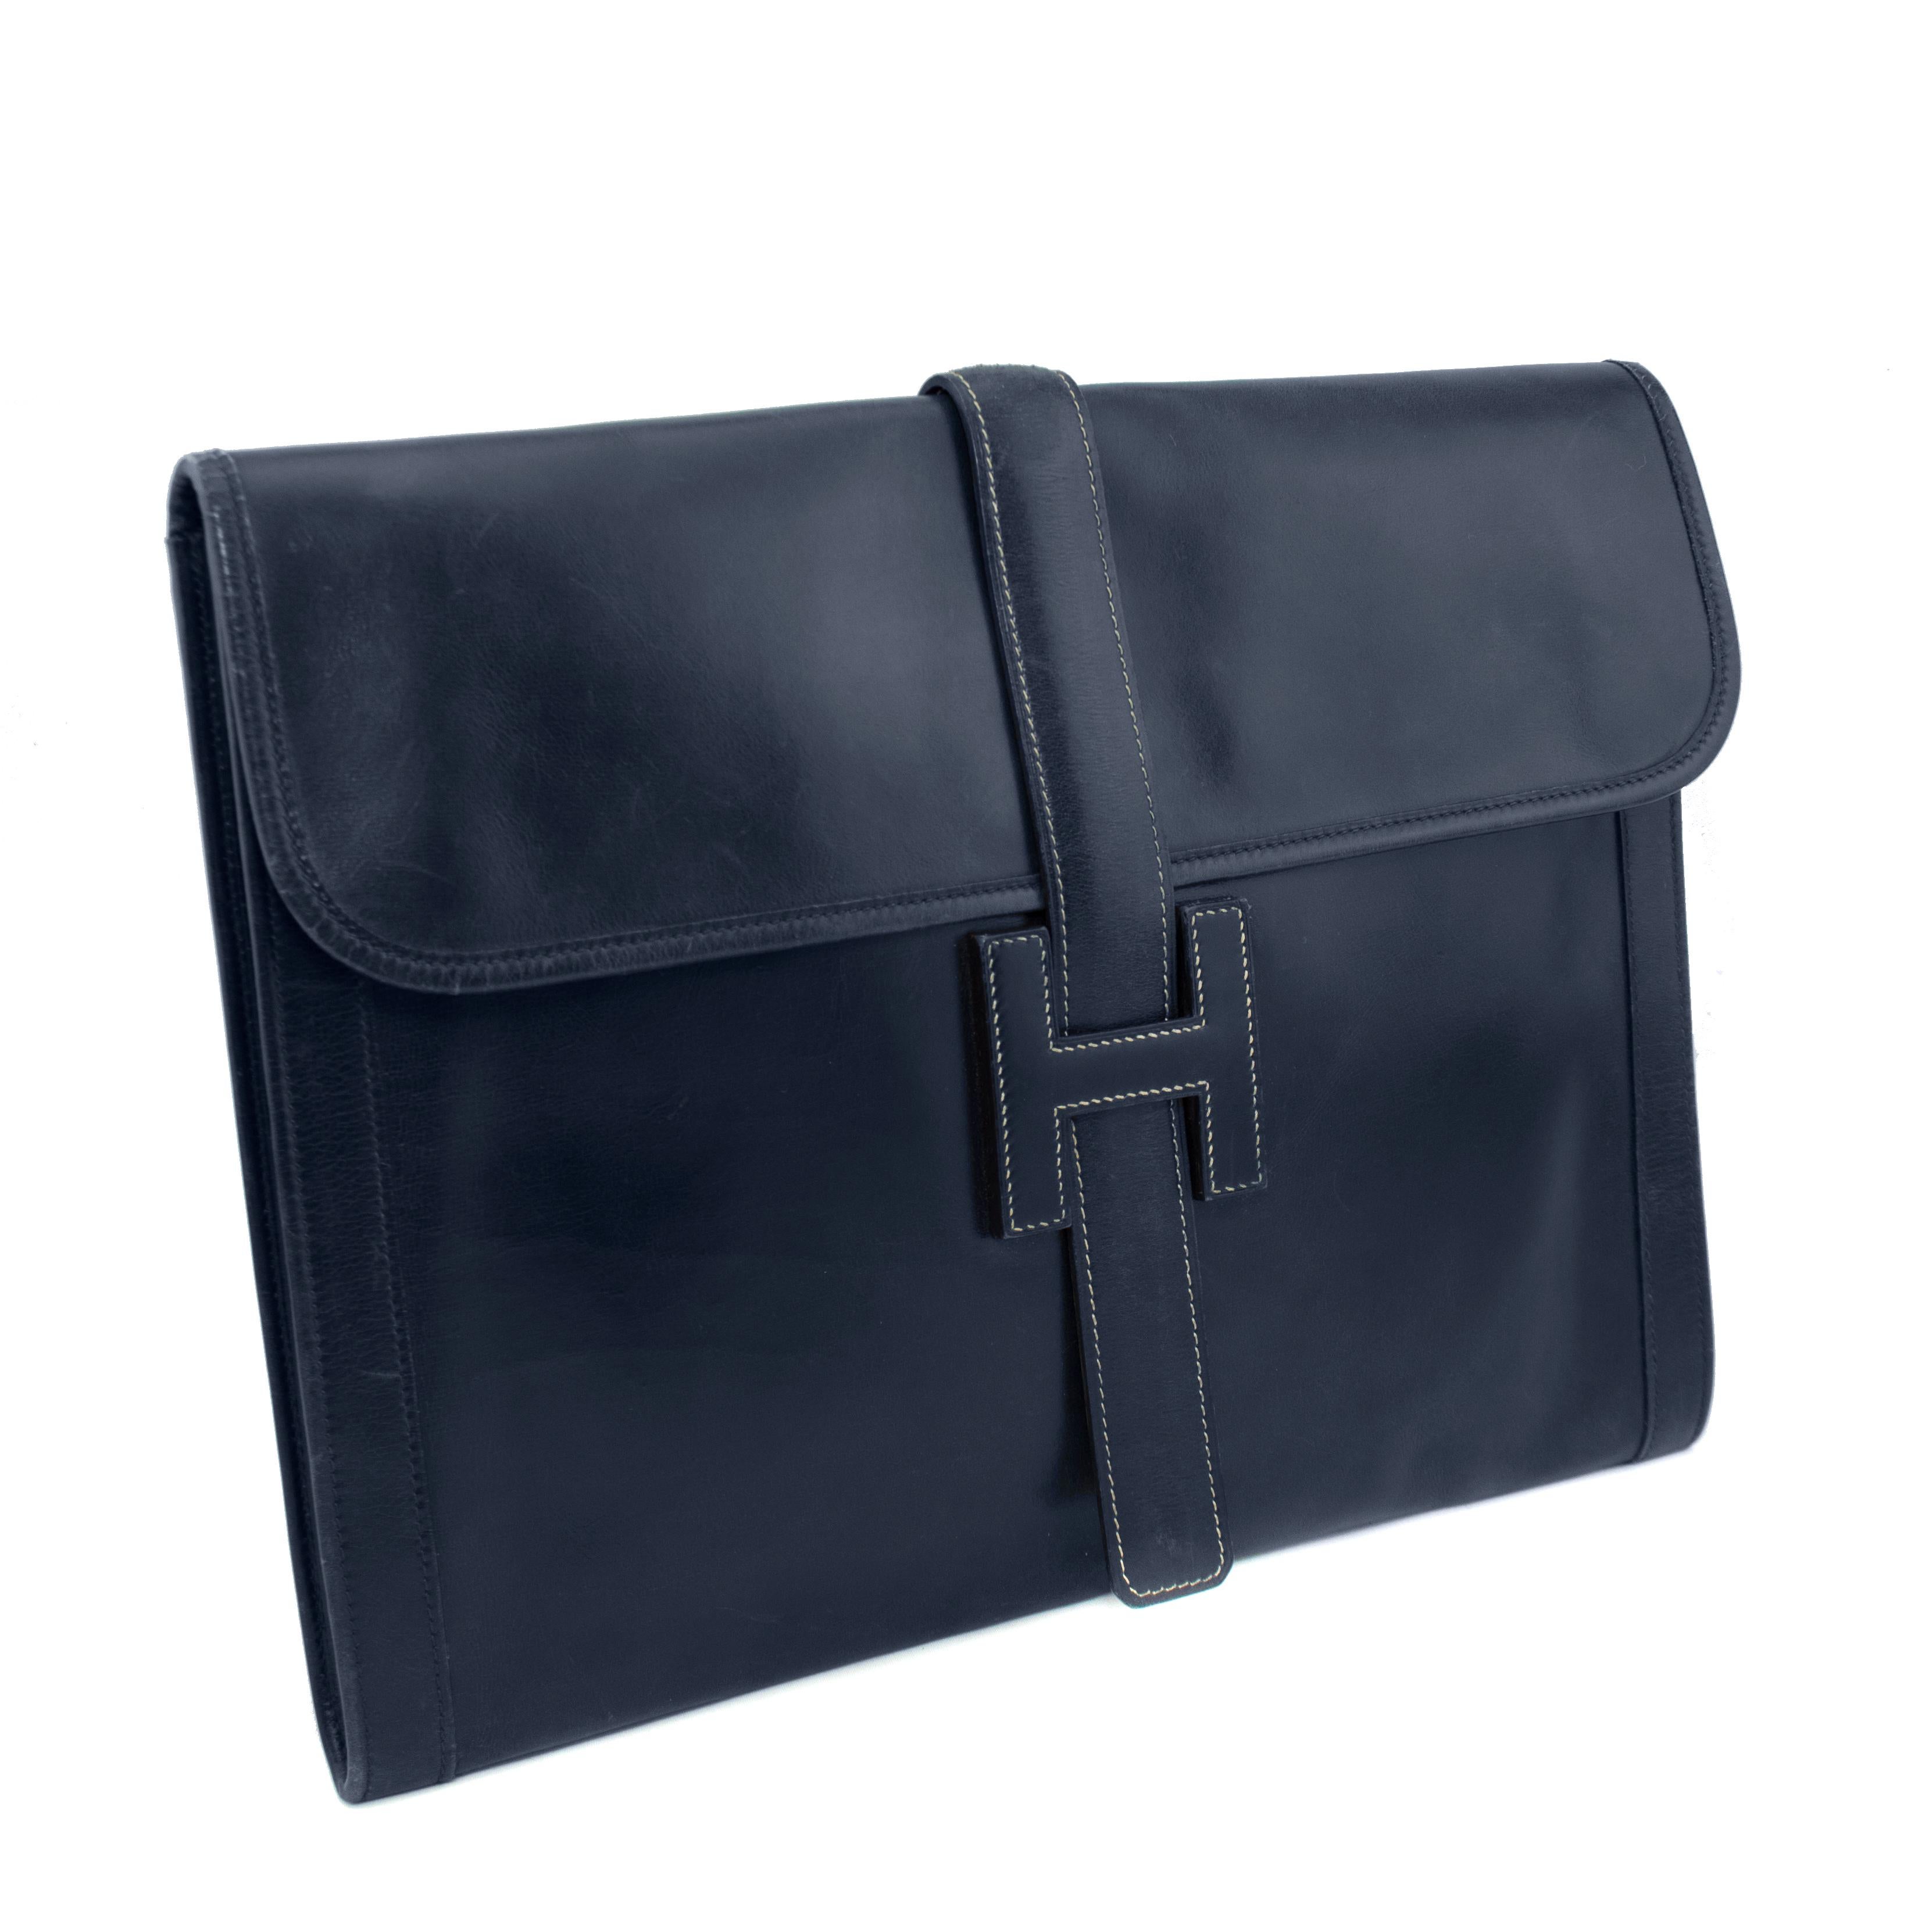 A classic that never goes out of the style, the Hermes Jige has been the perfect day-to-night clutch since it's creation in 1975. This 1977 navy leather version has the H style leather clasp on the front with a top flap opening. Finished with cream